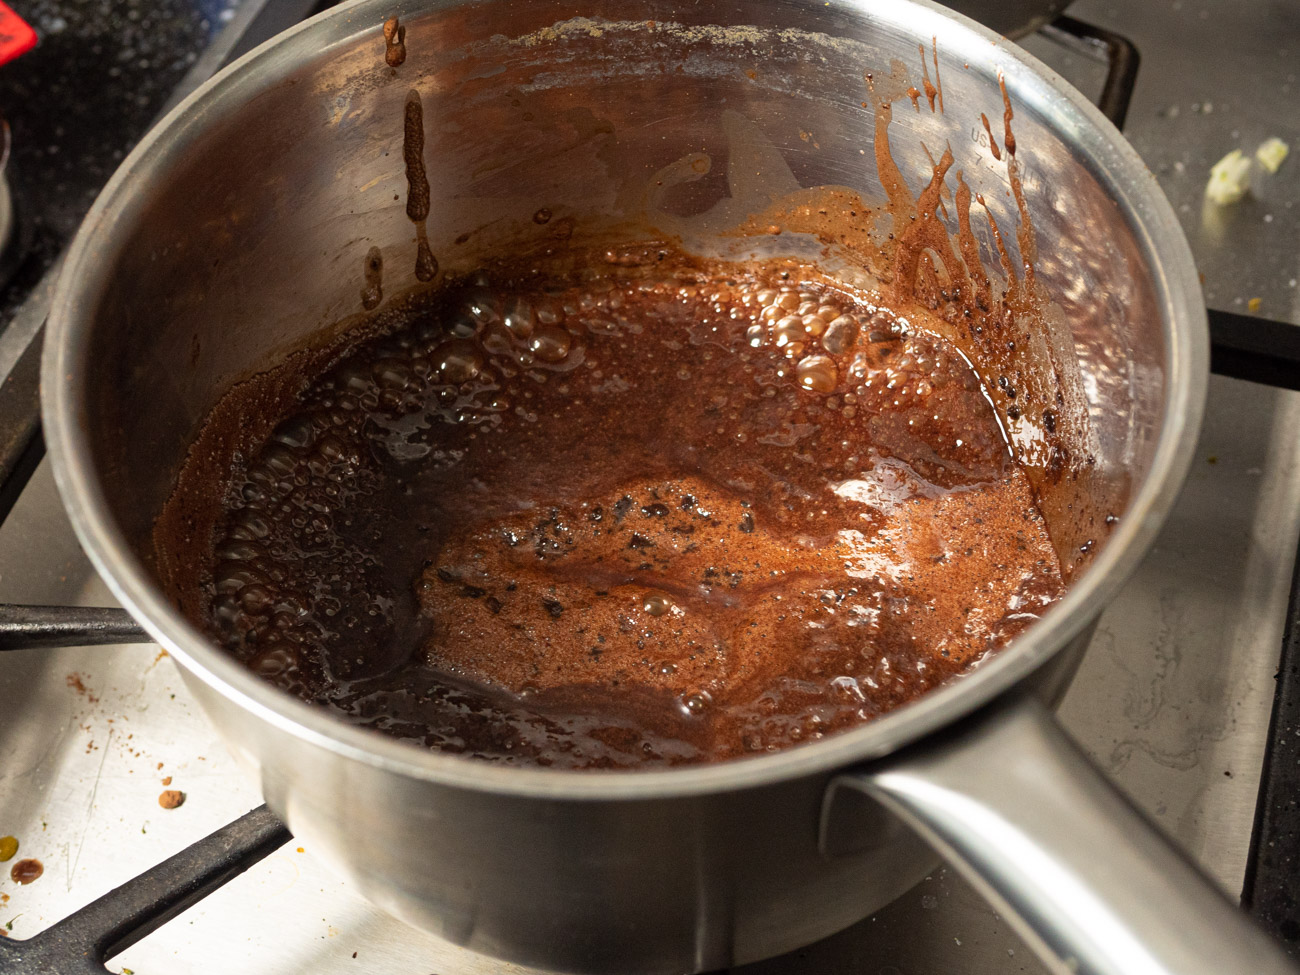 Preheat oven to 350˚. Heat 3/8 cup milk in saucepan over medium heat. Stir in 1/2 cup sugar and 1/4 cup cocoa. Bring to a boil and cook until thickened (about 2 minutes), stirring constantly.